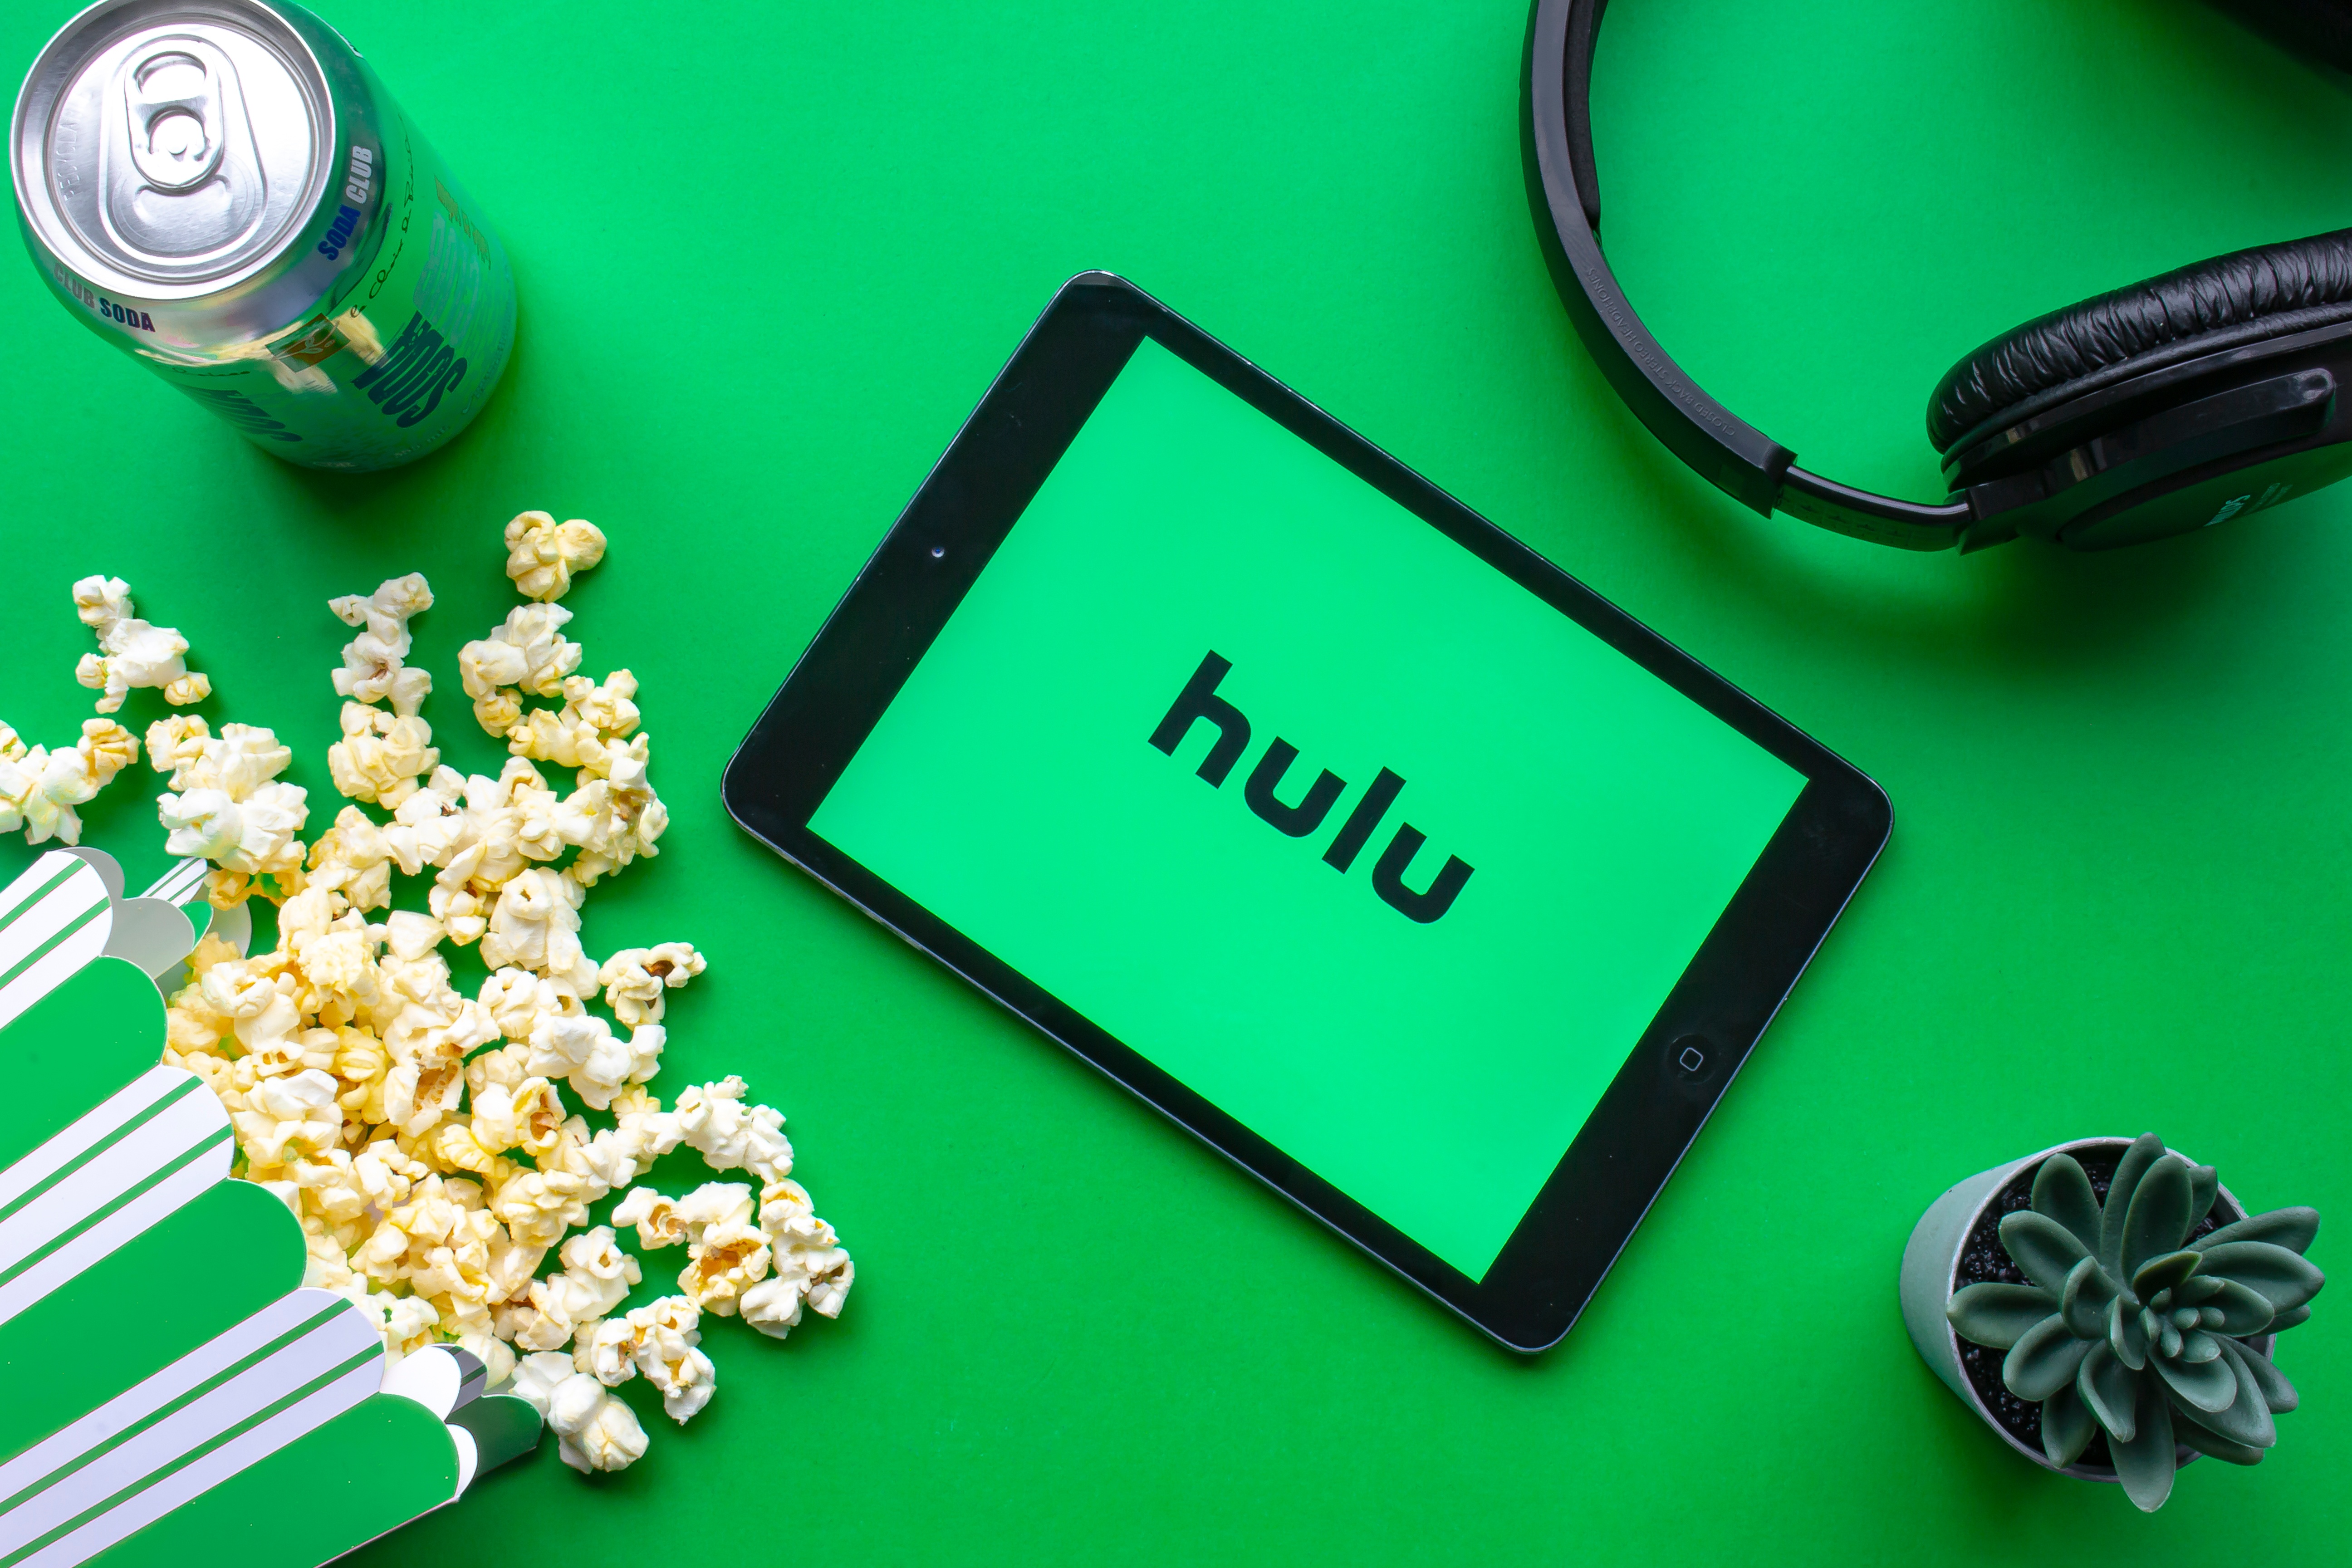 Hulu’s Black Friday Deal is Live: Get Hulu for $1.99 a Month for 12 Months